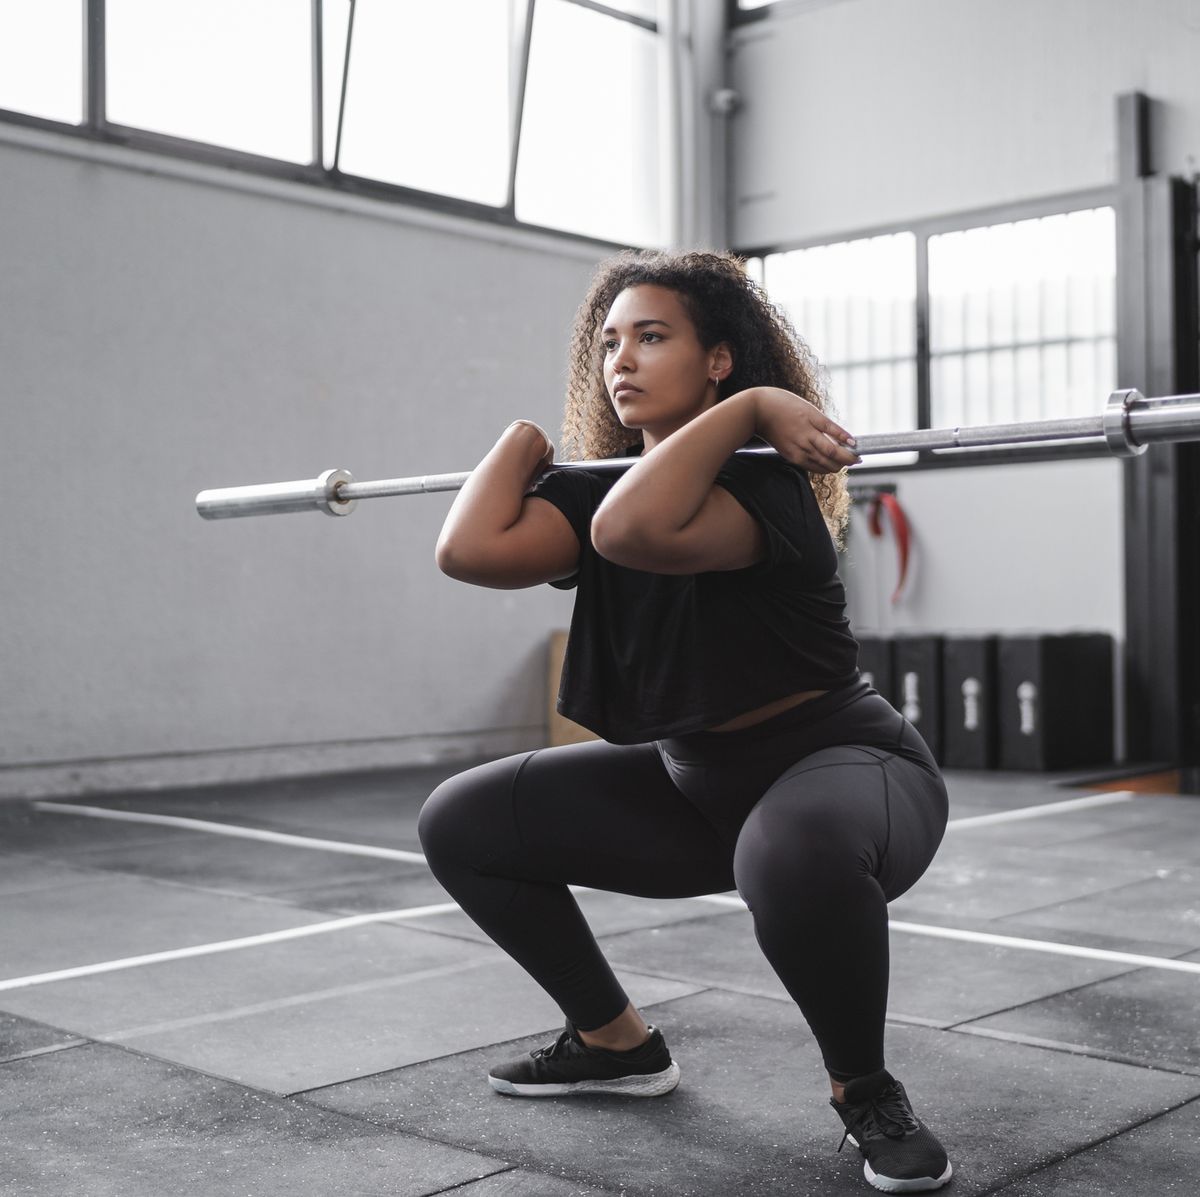 The Barbell Back Squat Form, Muscles & Main Benefits - Graduate